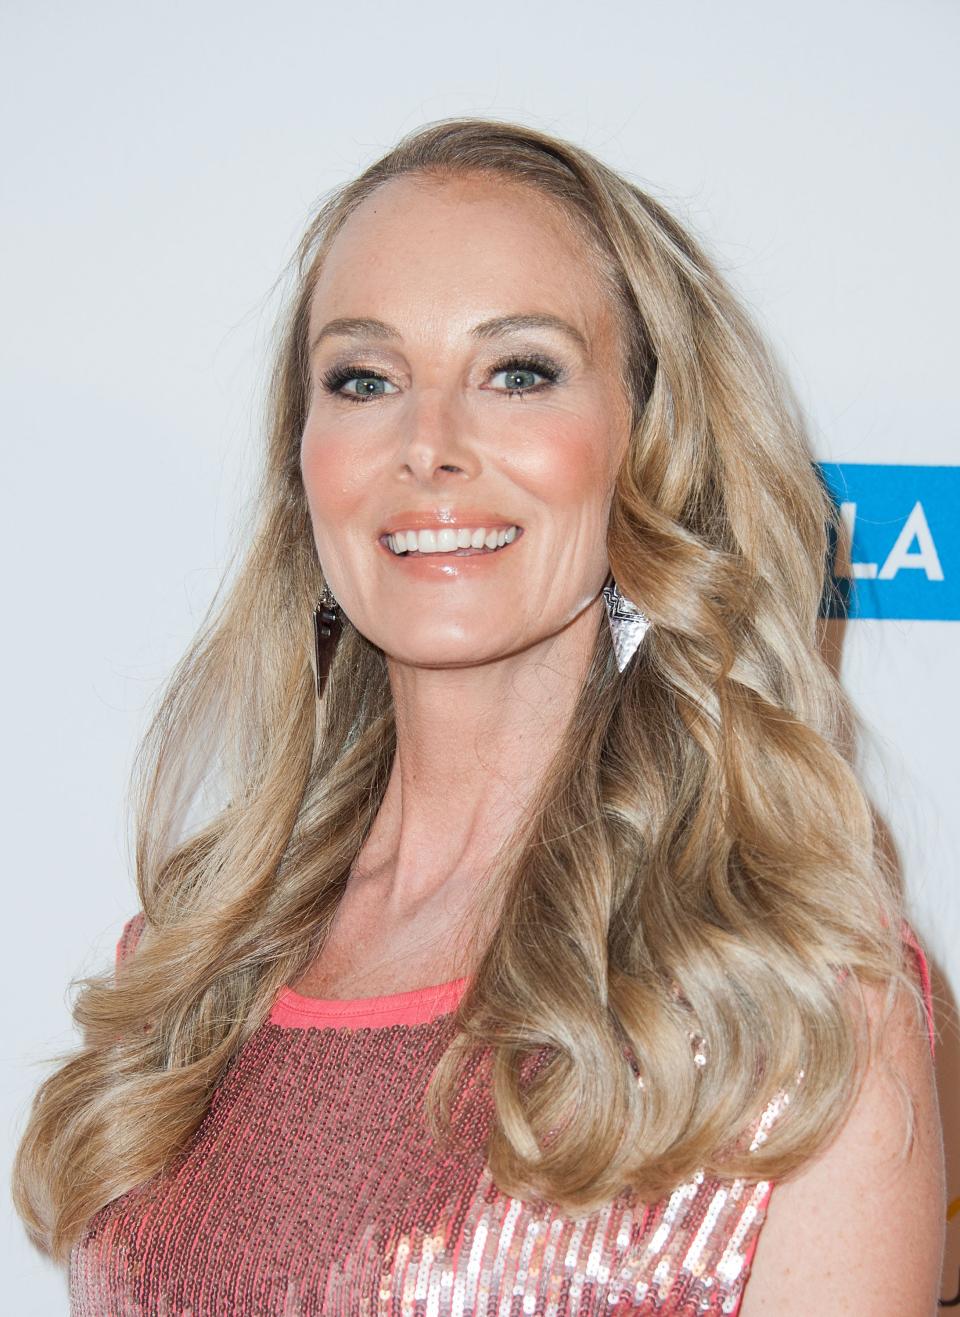 Chynna Phillips, pictured here, is opening up about a difficult conversation on the eve of her wedding with actor Billy Baldwin.